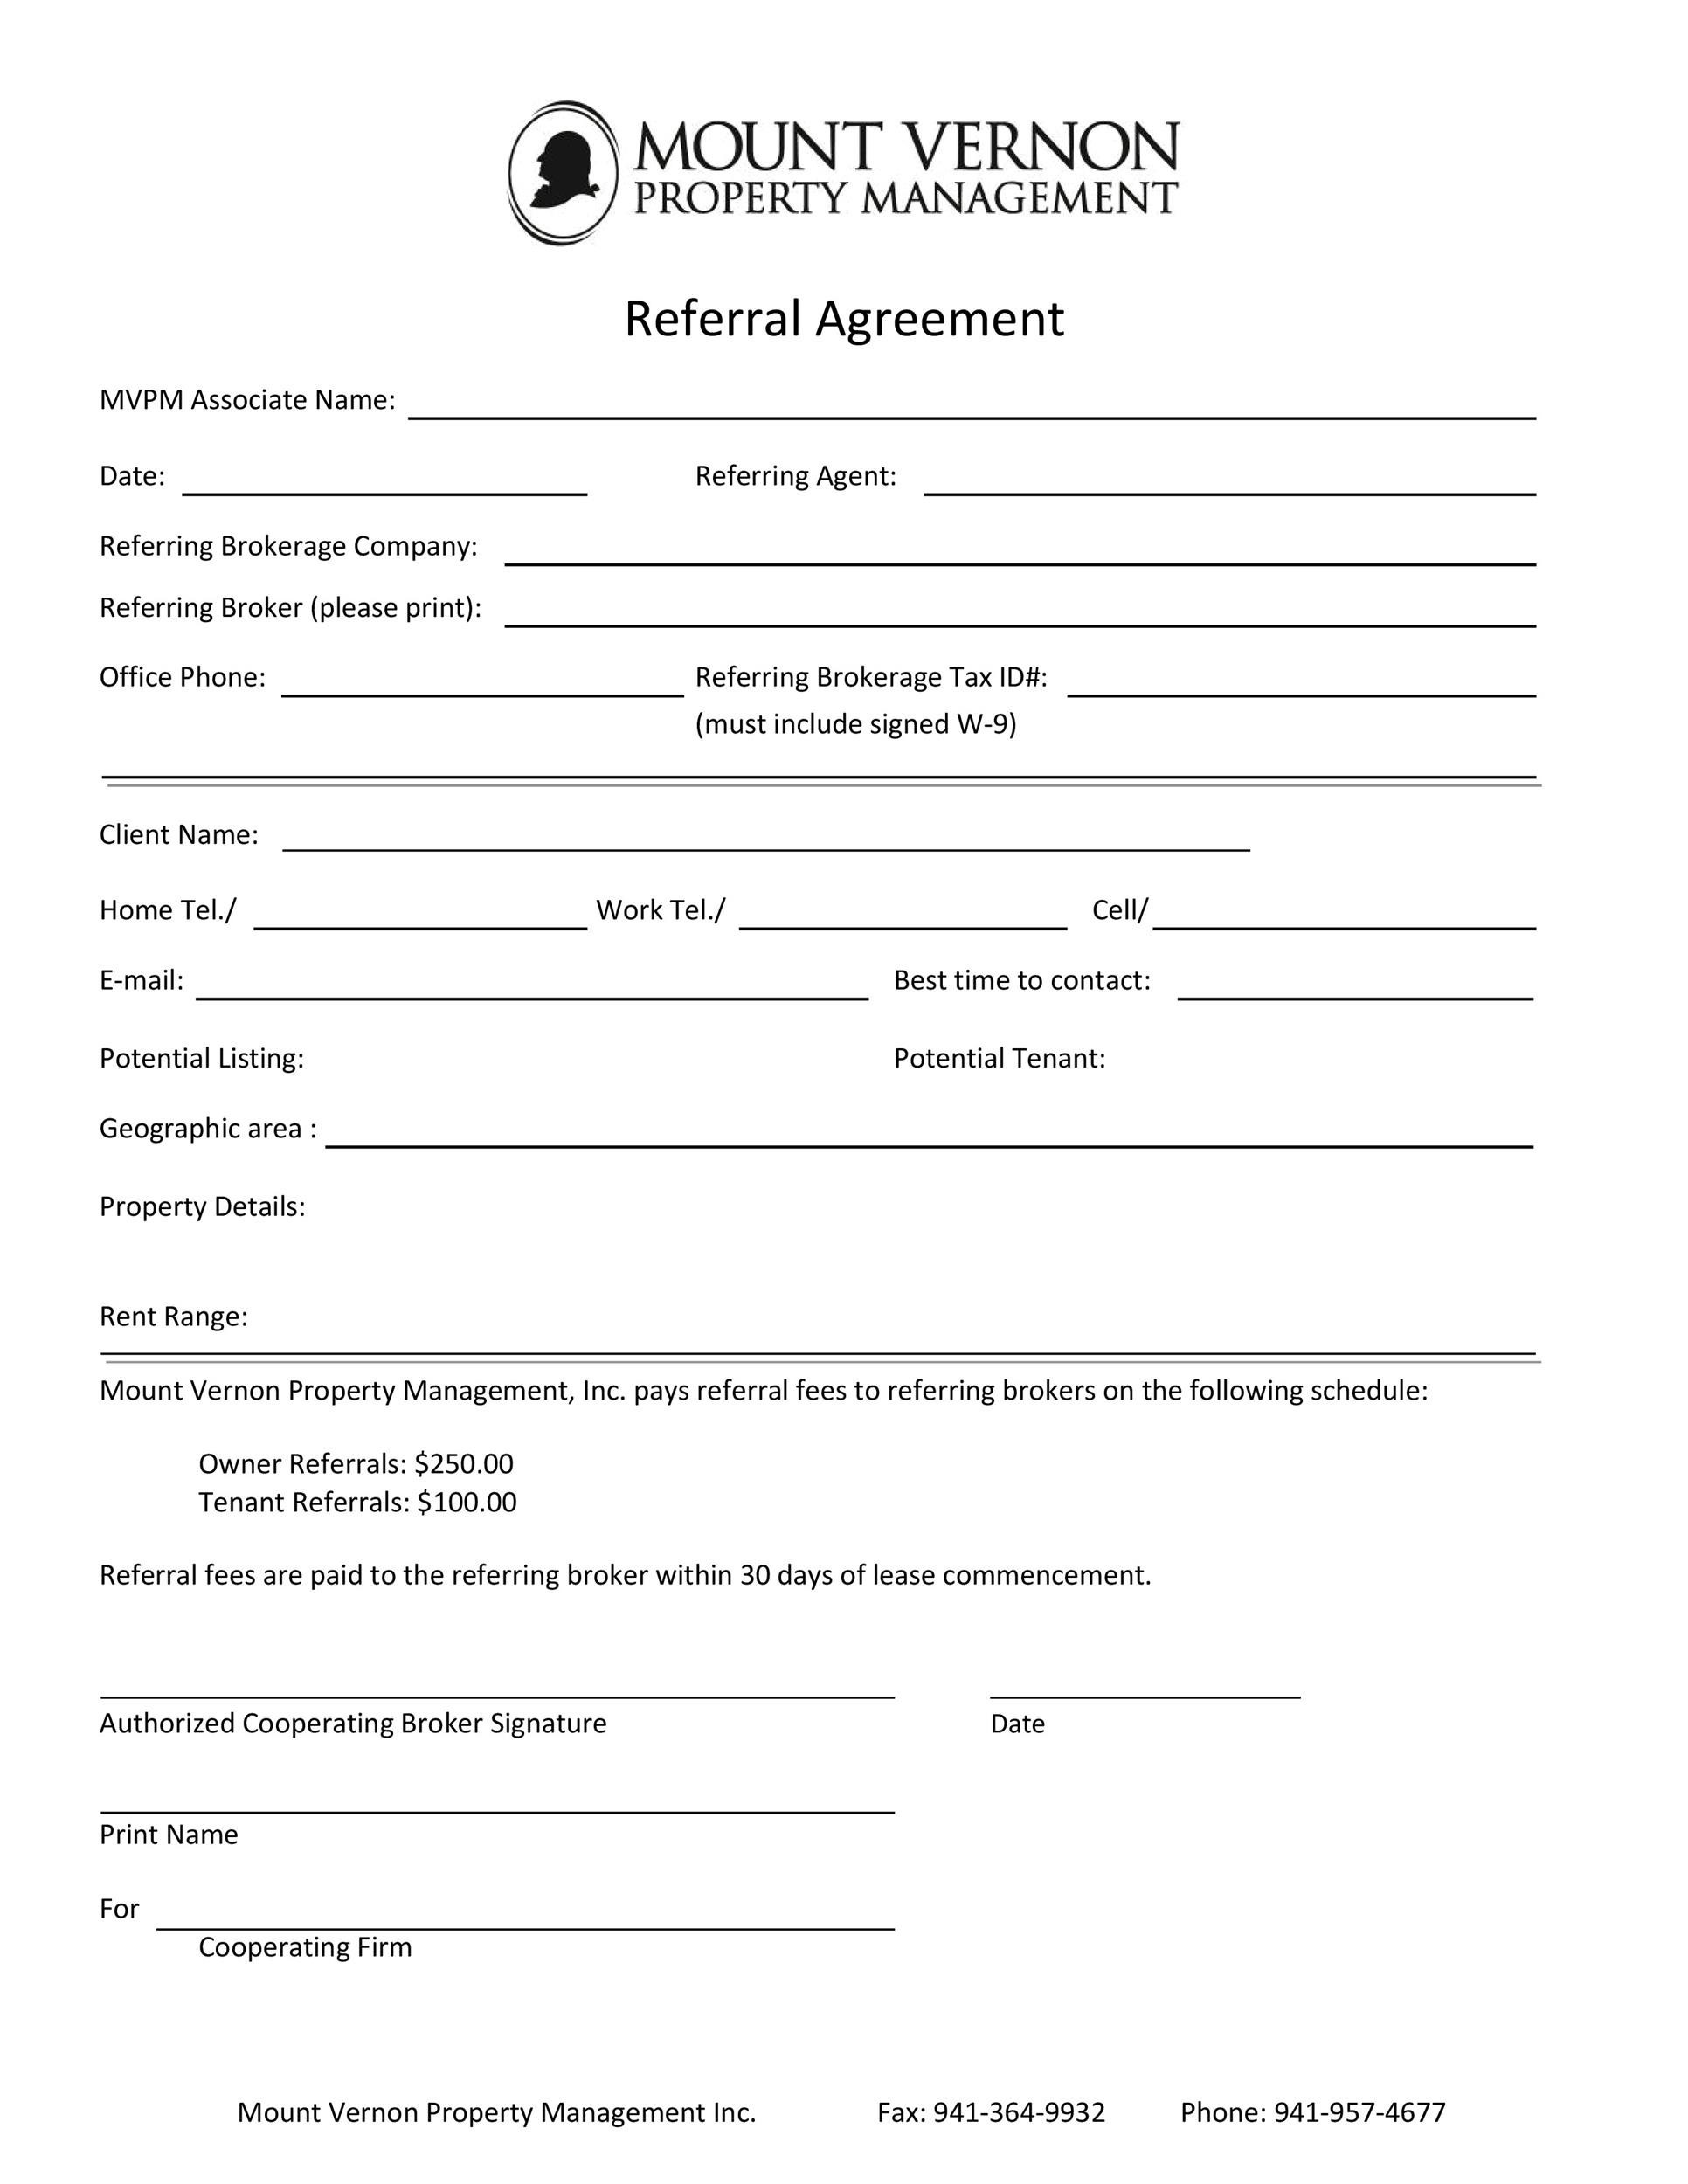 Free referral agreement template 33